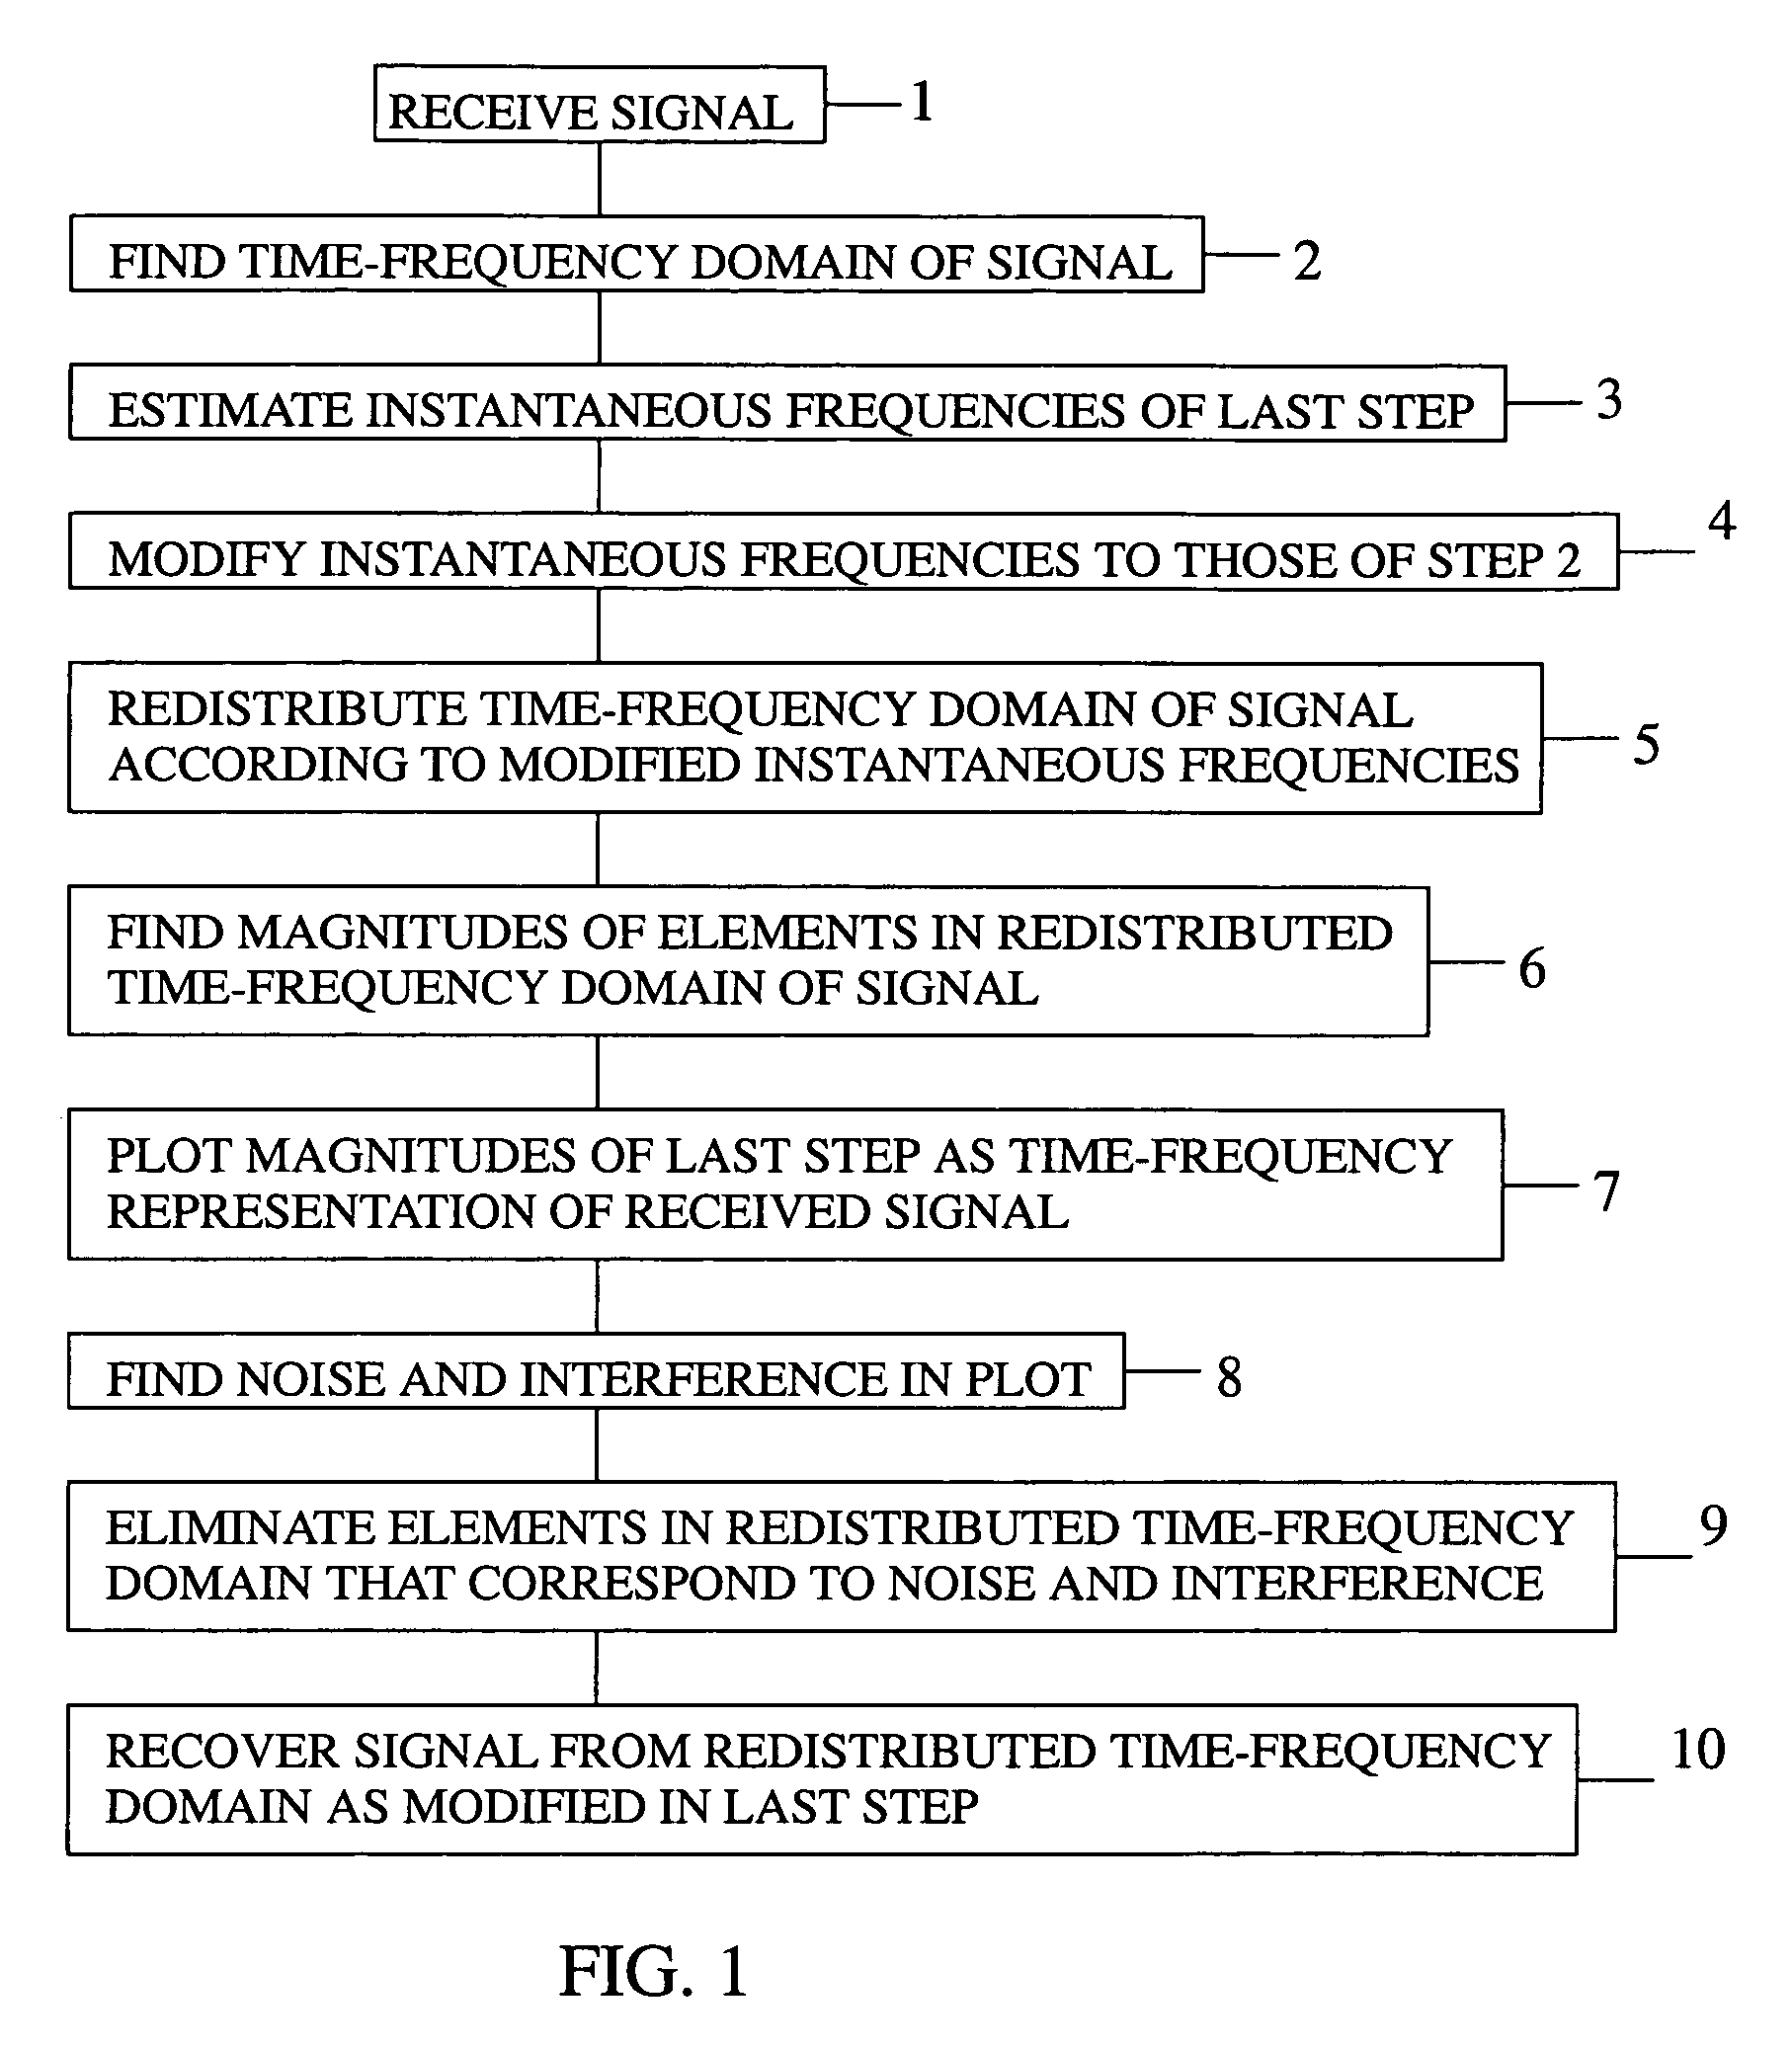 Method of removing noise and interference from signal